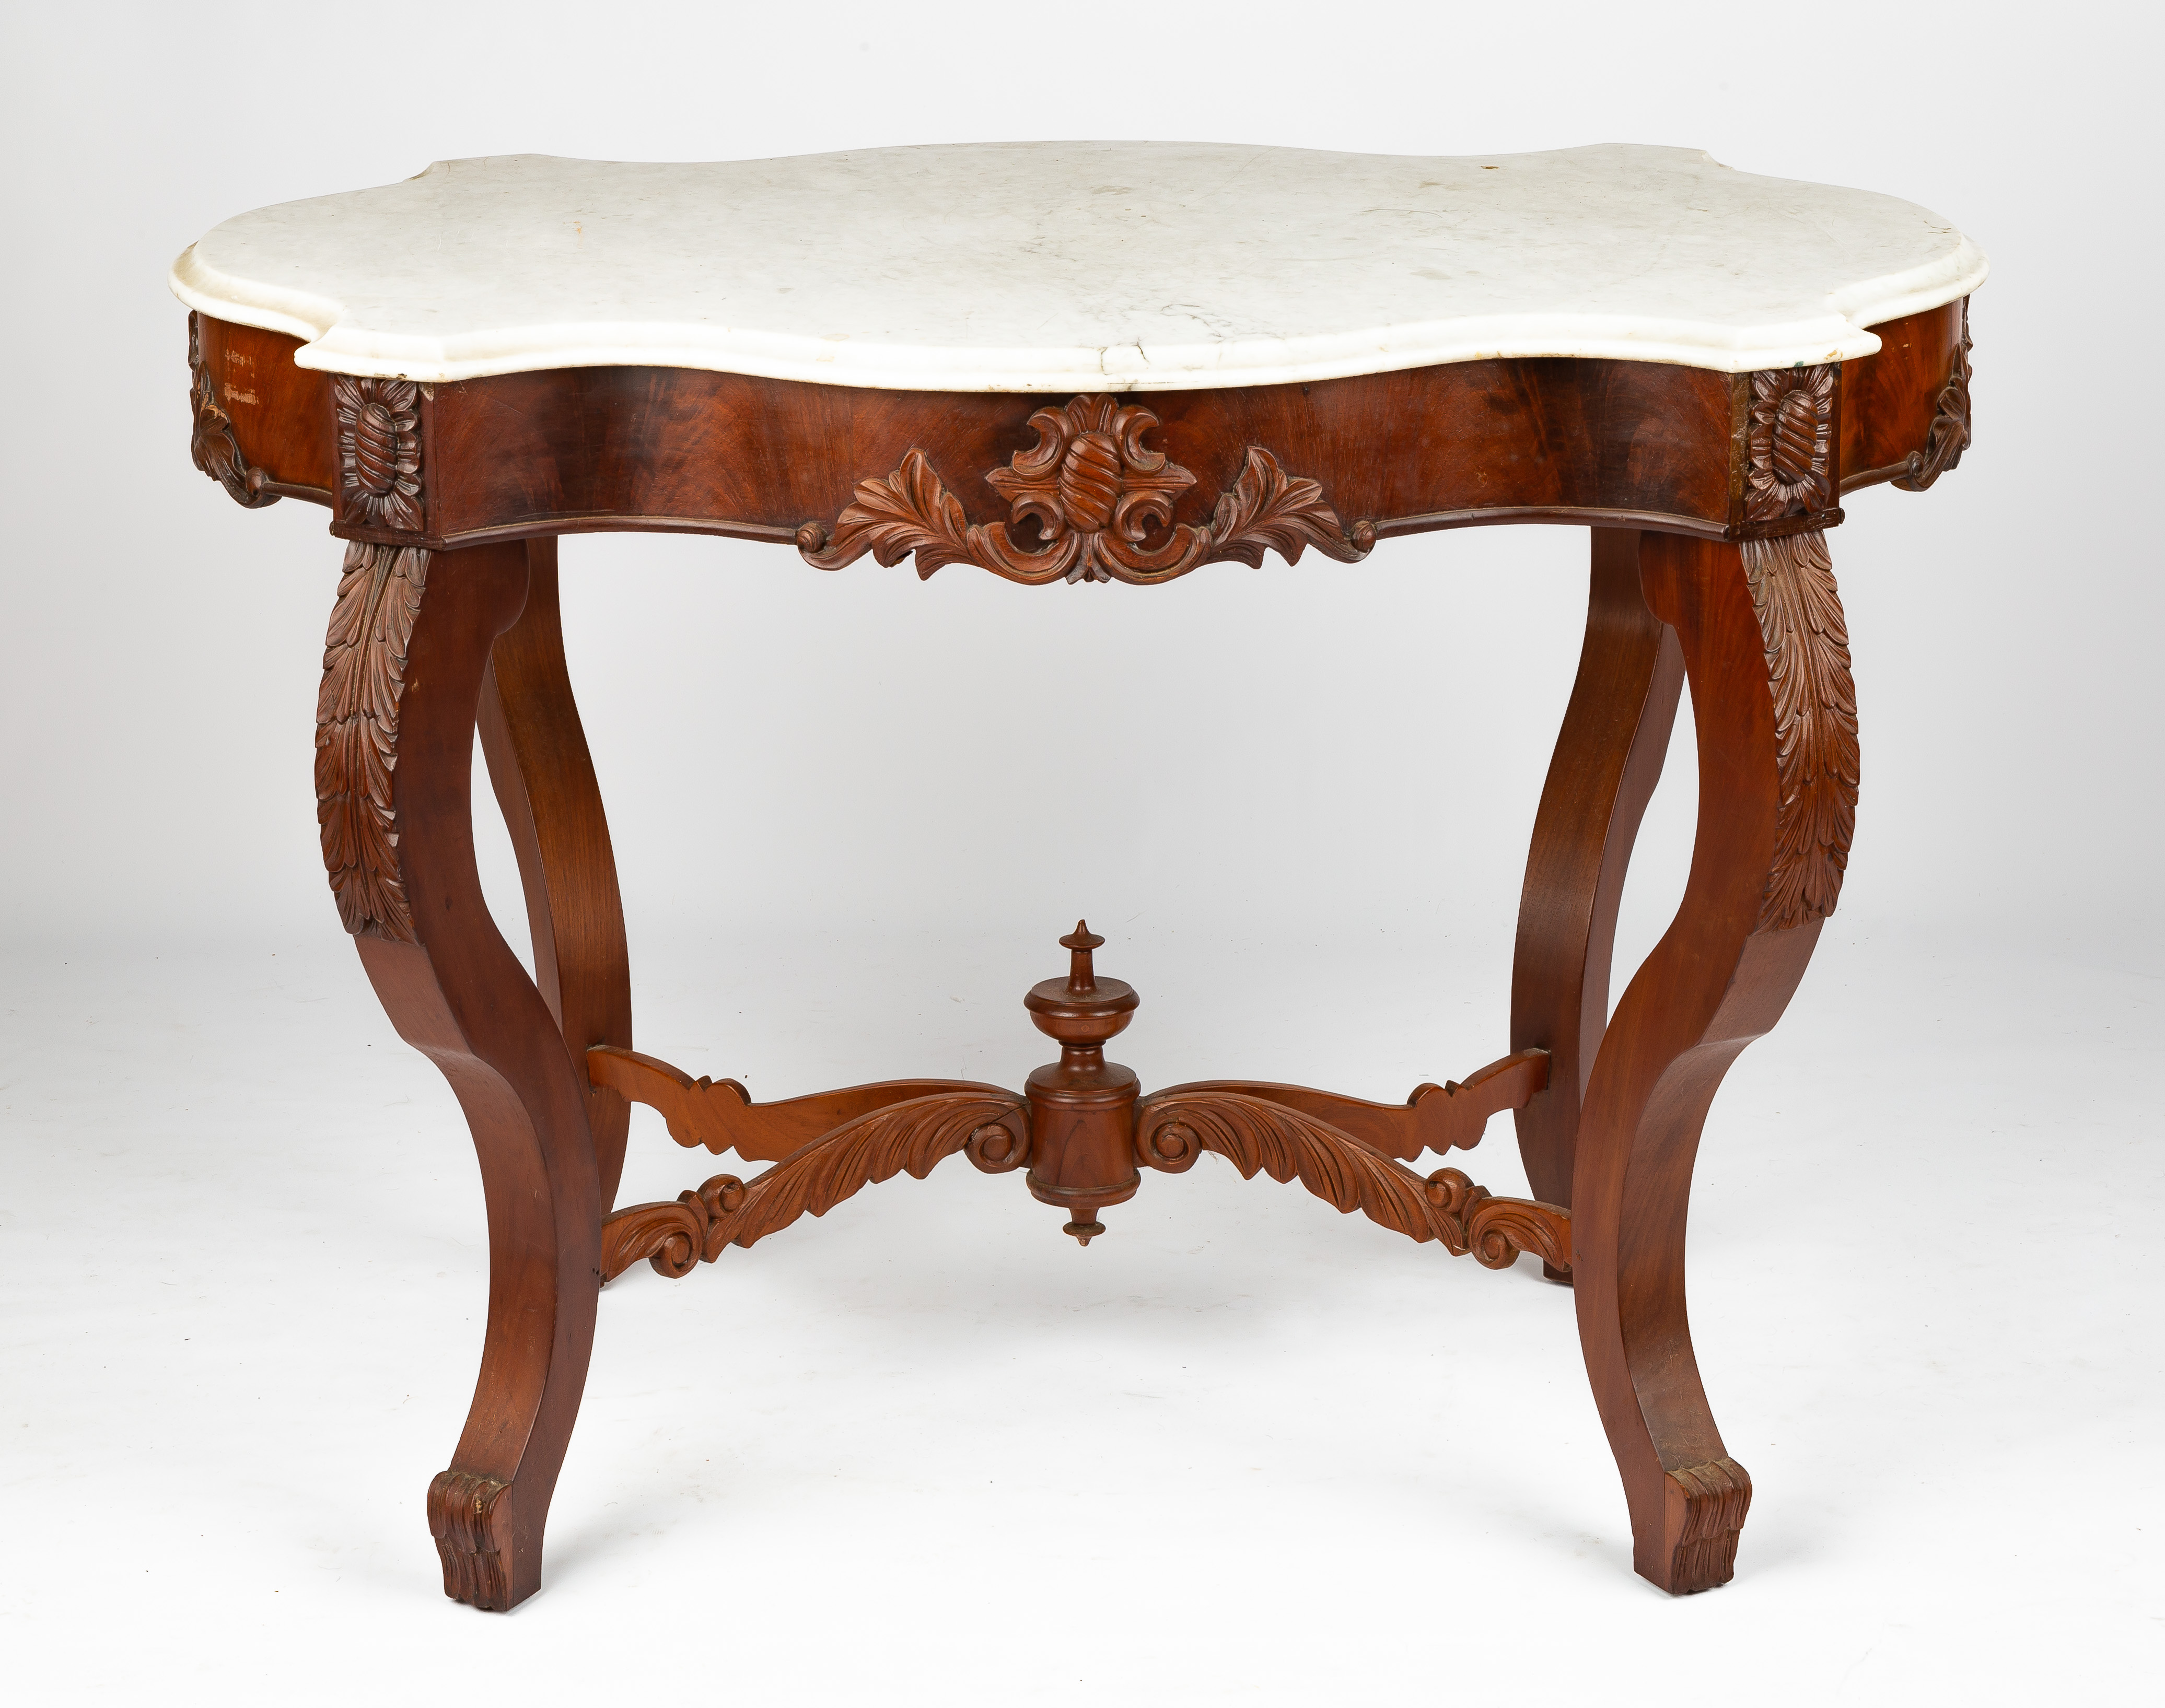 MARBLE TURTLE-TOP TABLE 19th century.